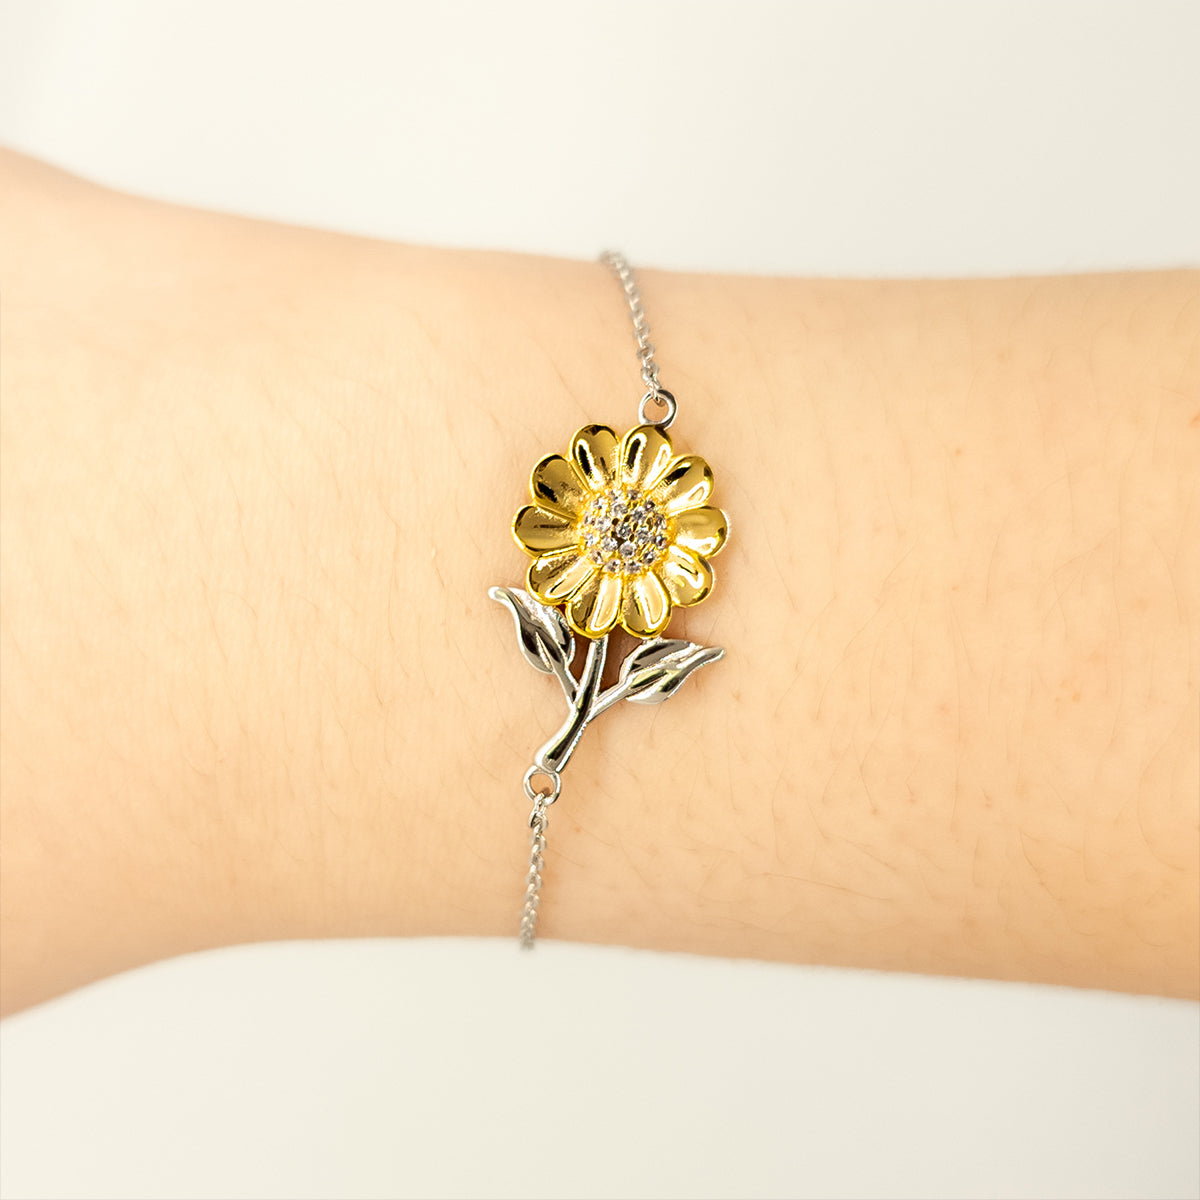 Bestie Sunflower Bracelet - Engraved Friendship Gift for Her, You will always have a special place in my heart, Meaningful Jewelry for Birthday, Christmas, and Graduation, Bestie, Best Friend, BFF